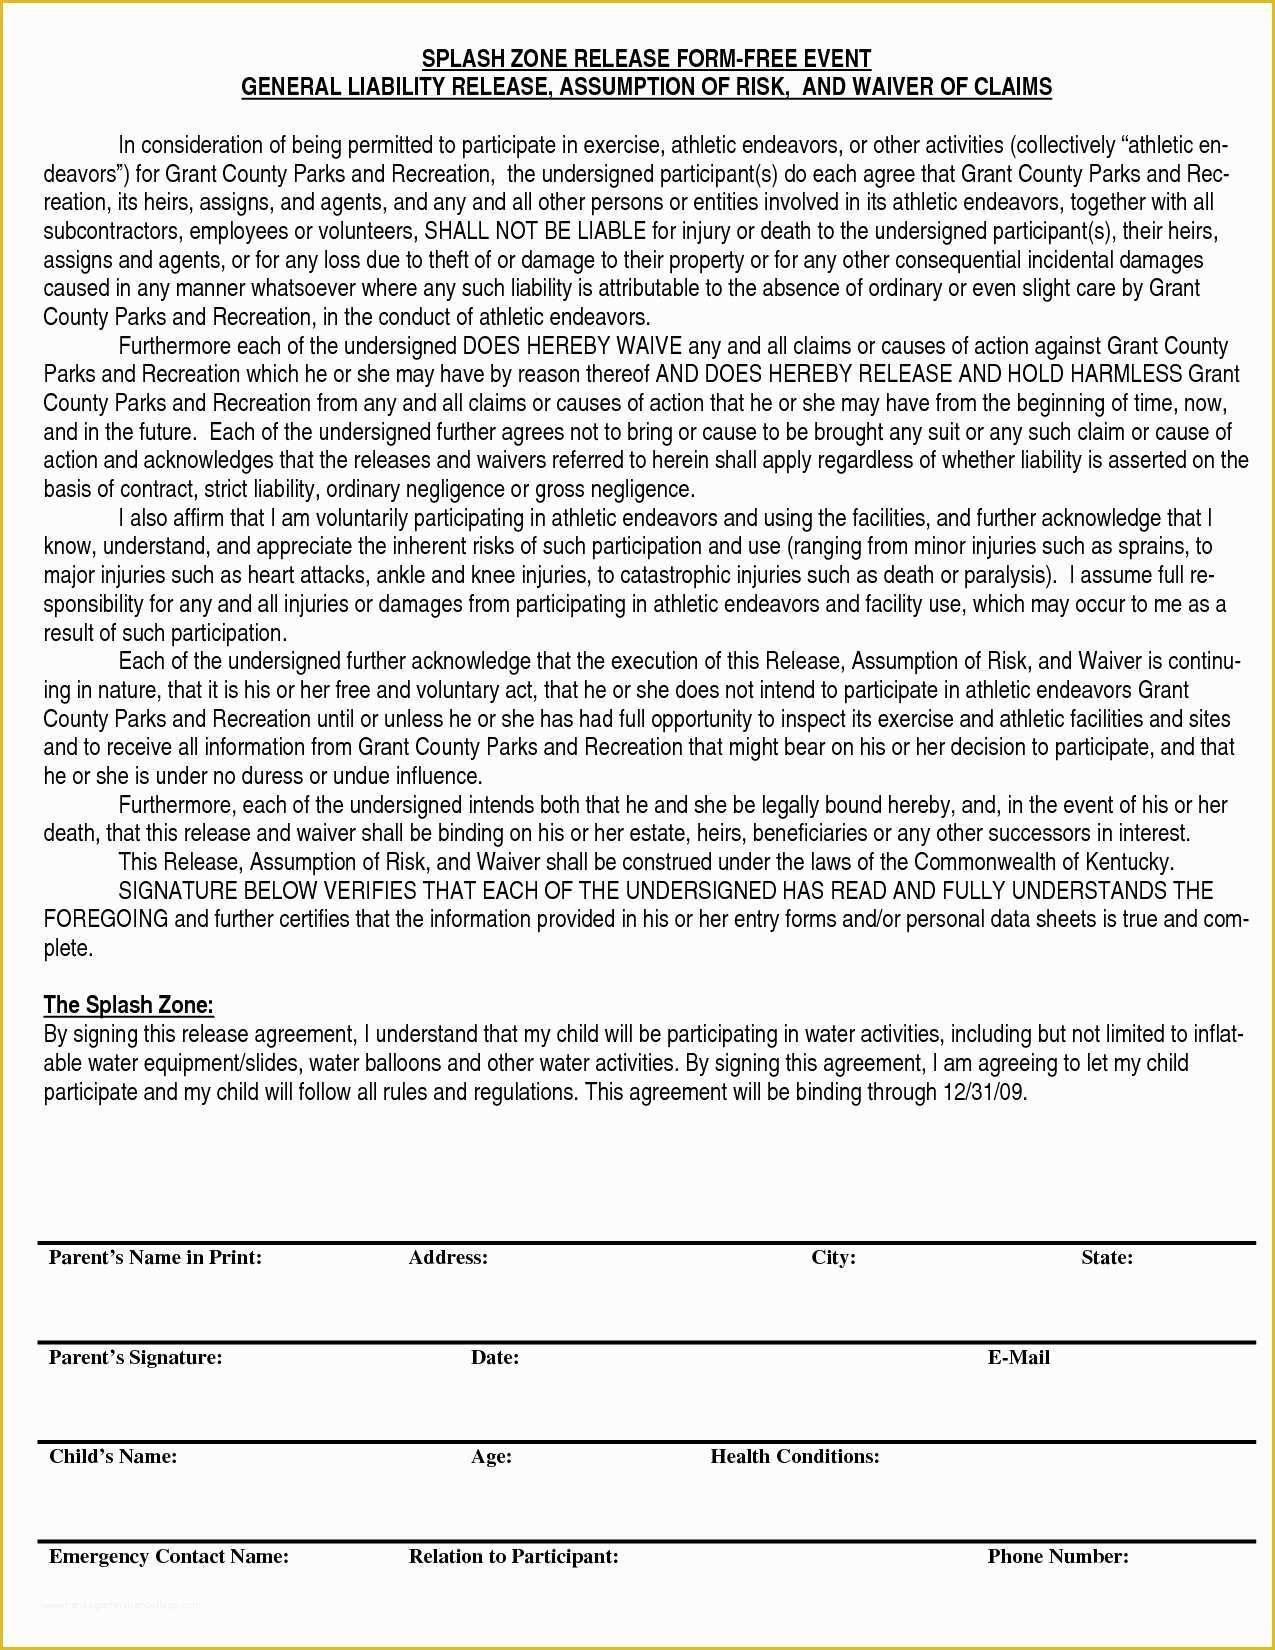 Free General Liability Release form Template Of Release Liability form Template thebridgesummit Ideas